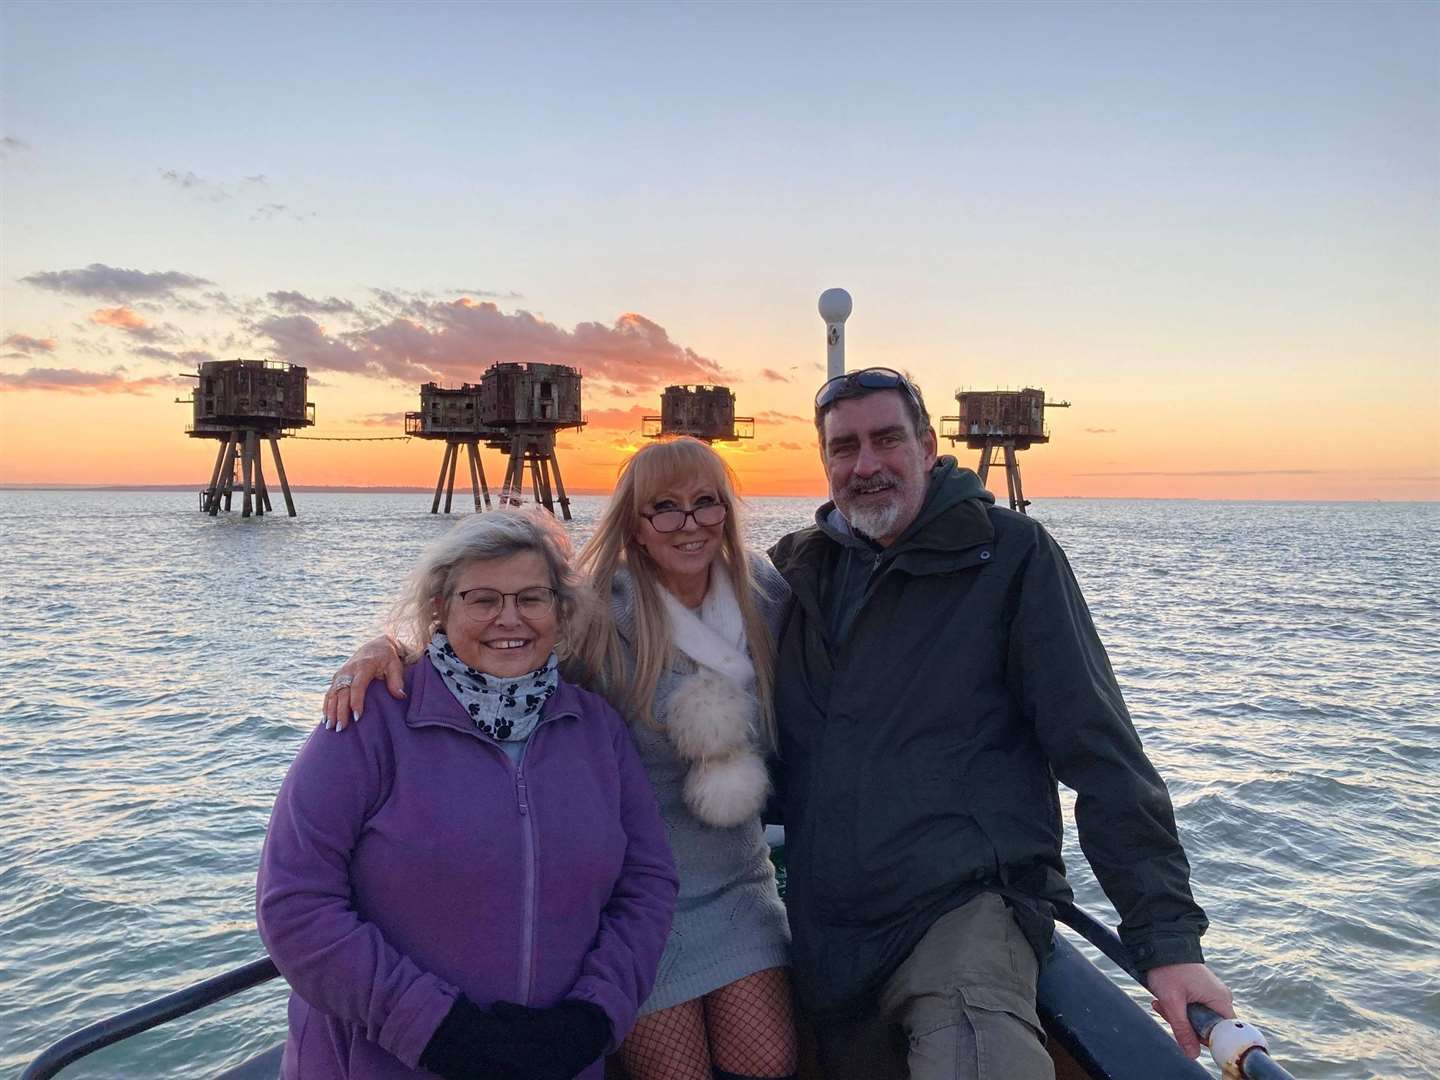 Clare and Andy Larkin with Margaret 'Flo' McEwan at the Second World War Maunsell sea forts at sunset courtesy of the X-Pilot launch based on Sheppey